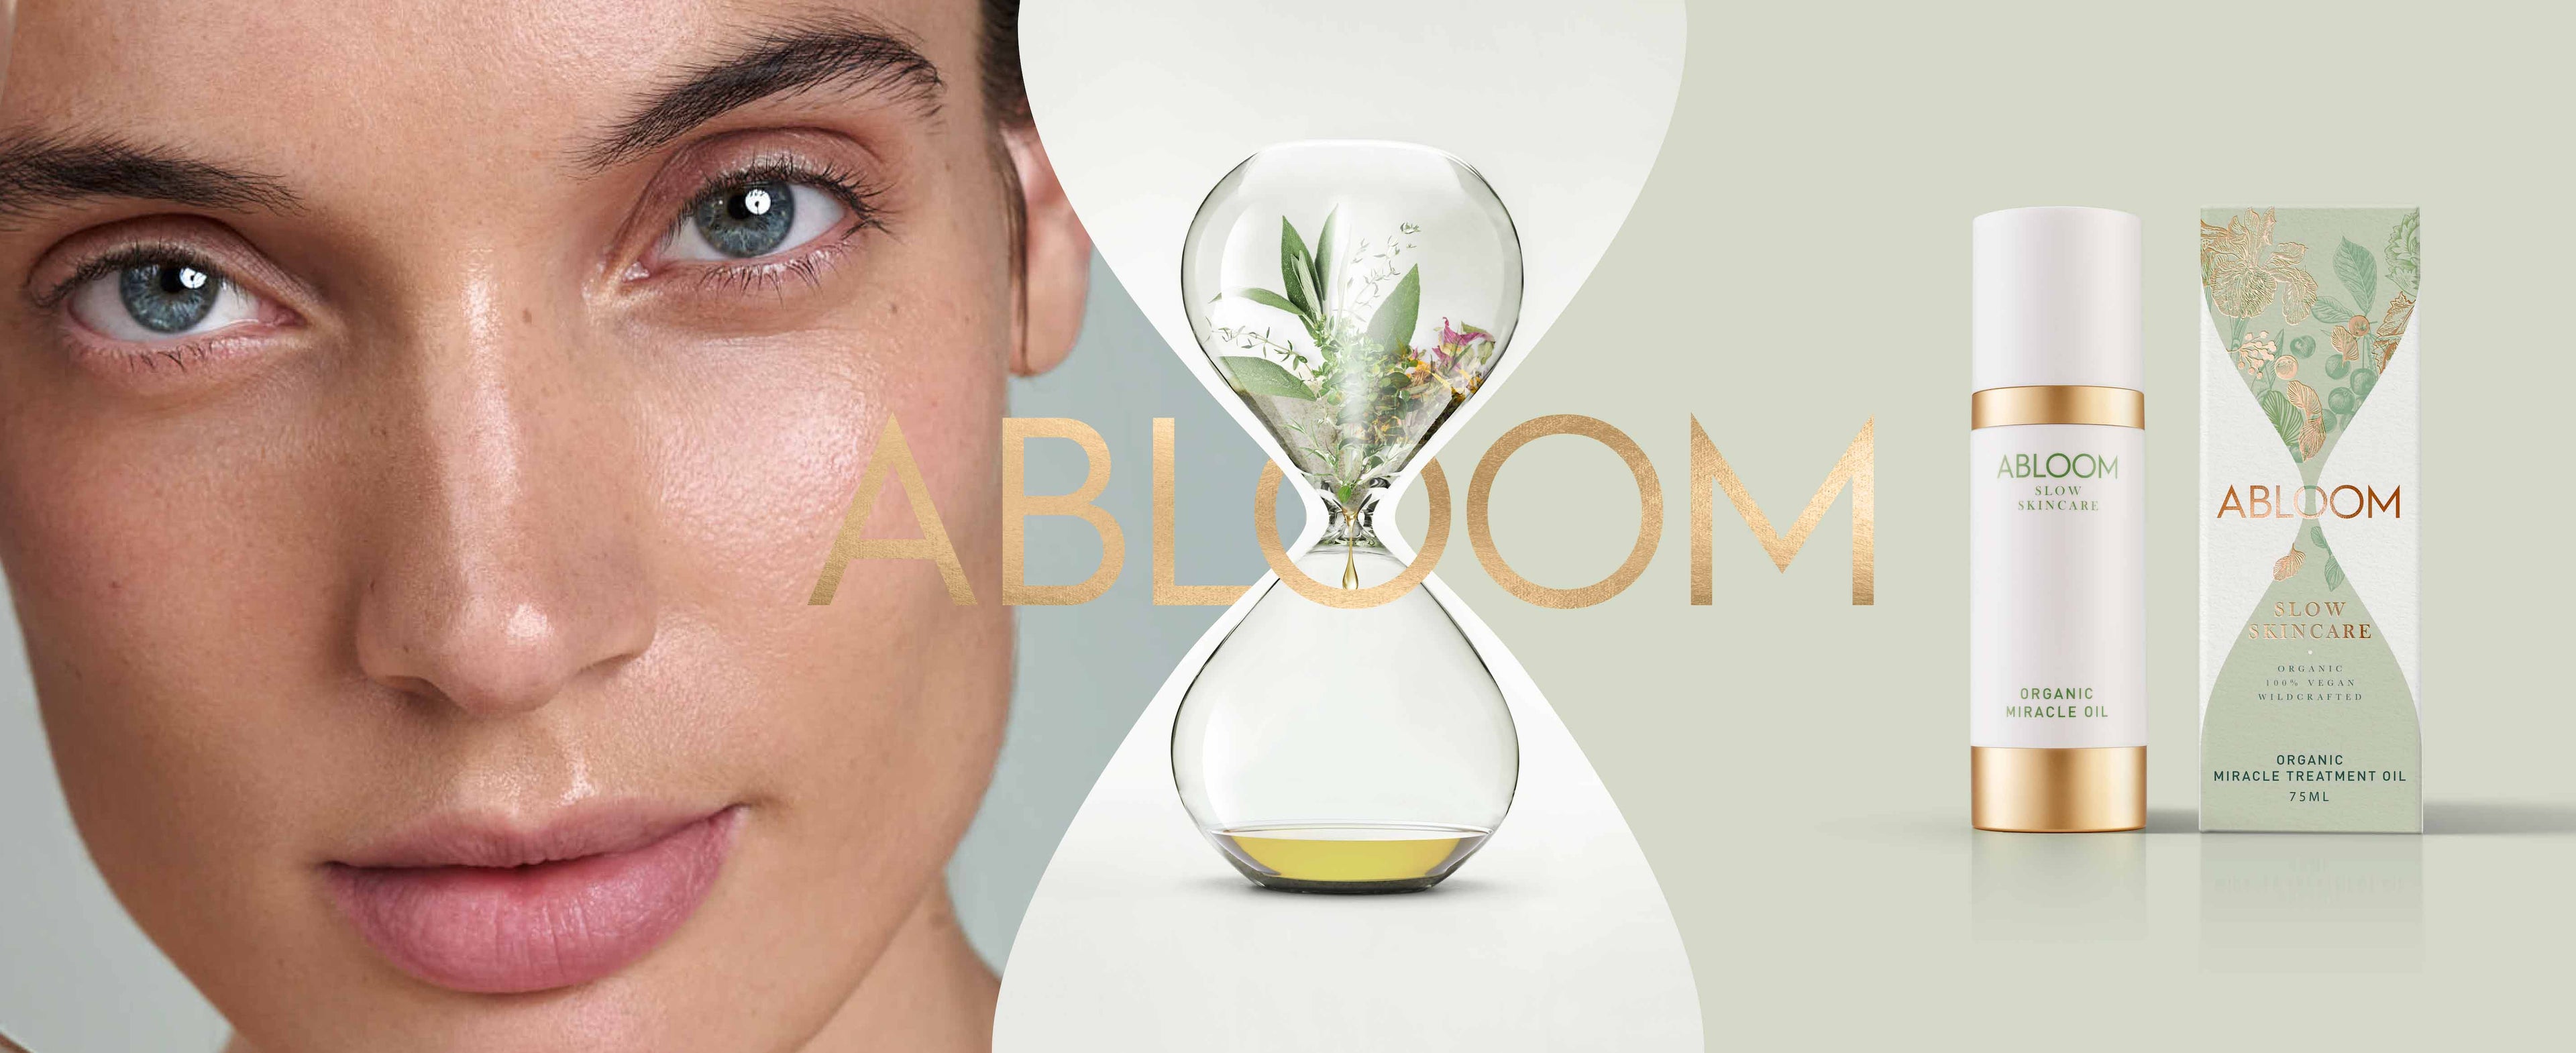 Abloom Slow Skincare the Face behind